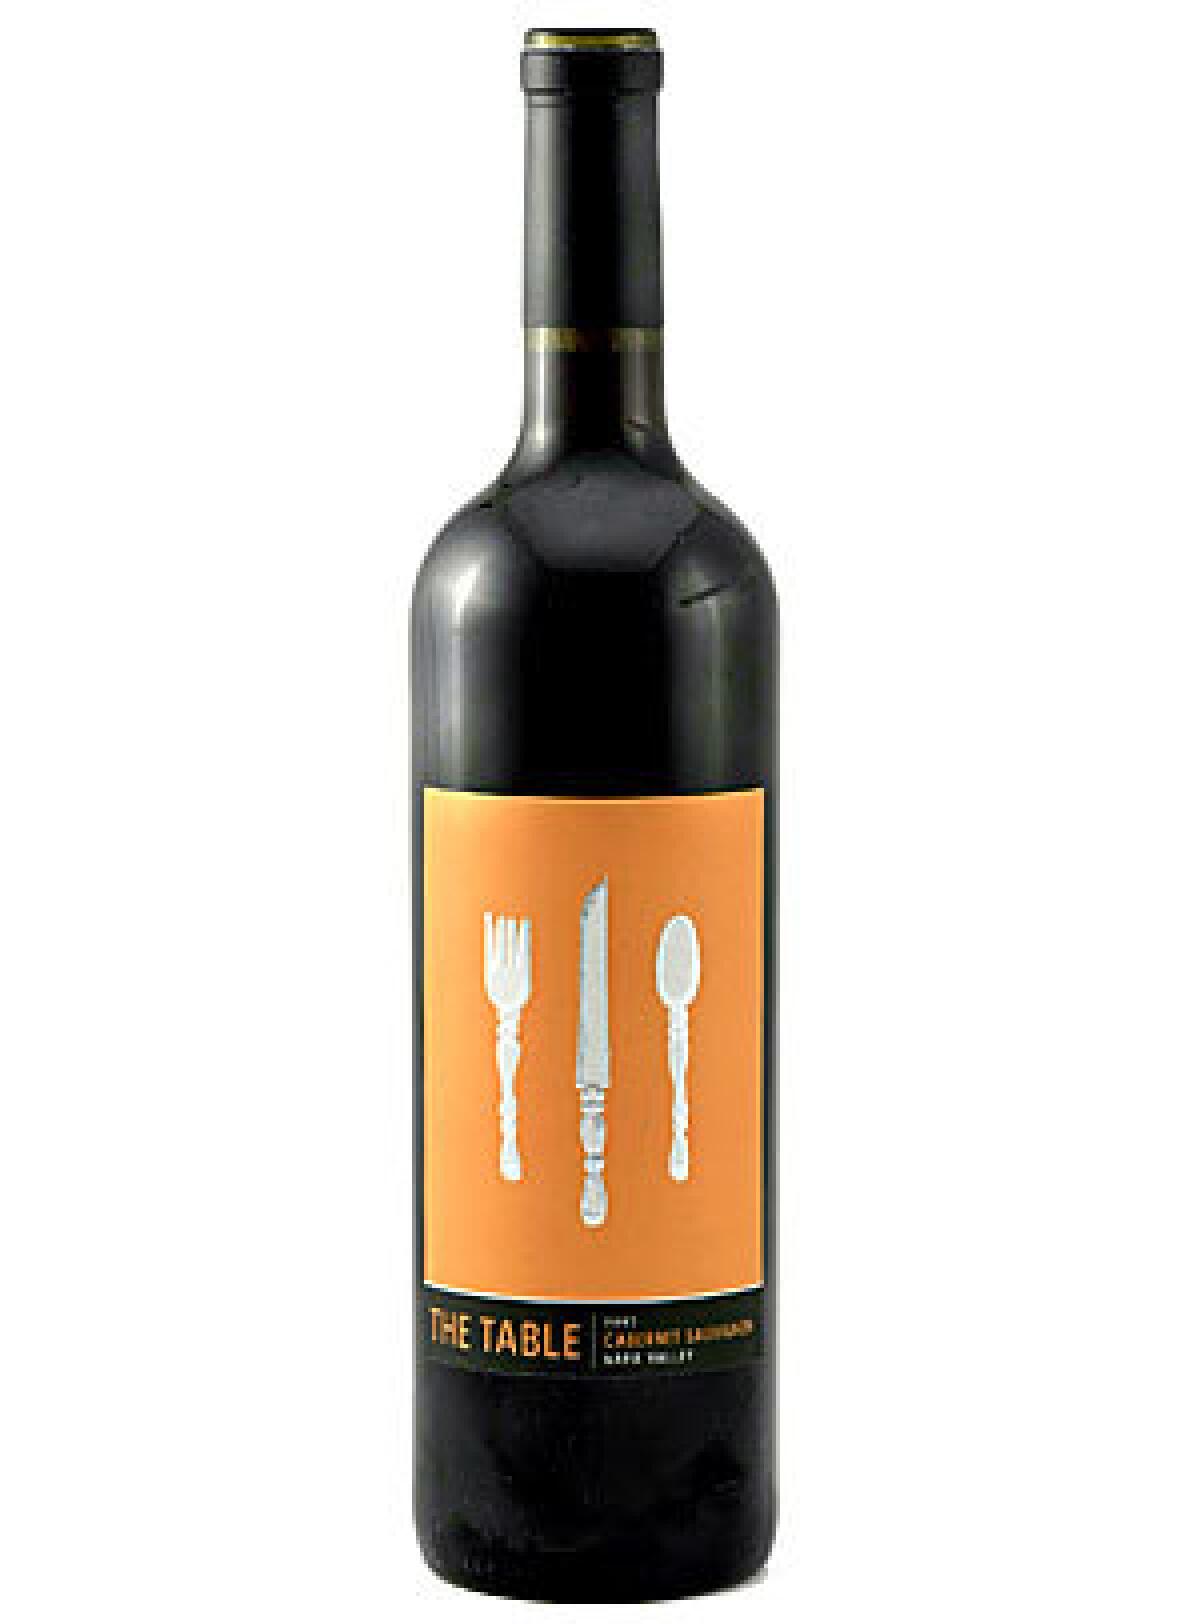 WINE OF THE WEEK: 2007 Once Wines Cabernet Sauvignon "the Table." Click here for details.